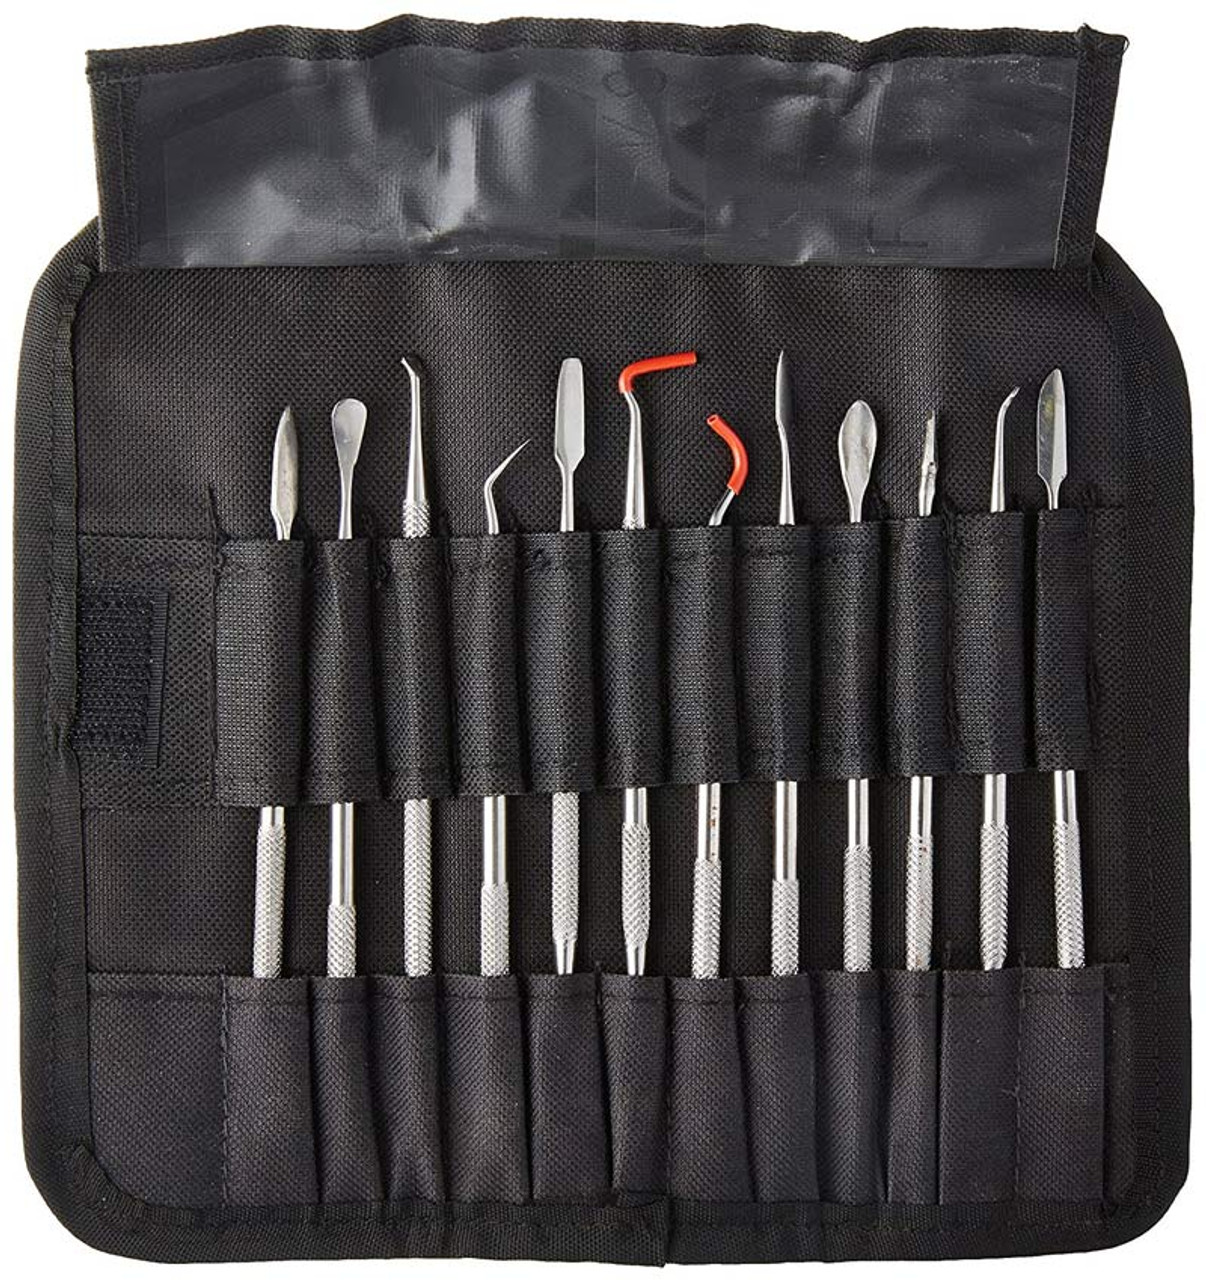 Premium 5pc Wax Tools Probe Wax Carving Tool Stainless Steel